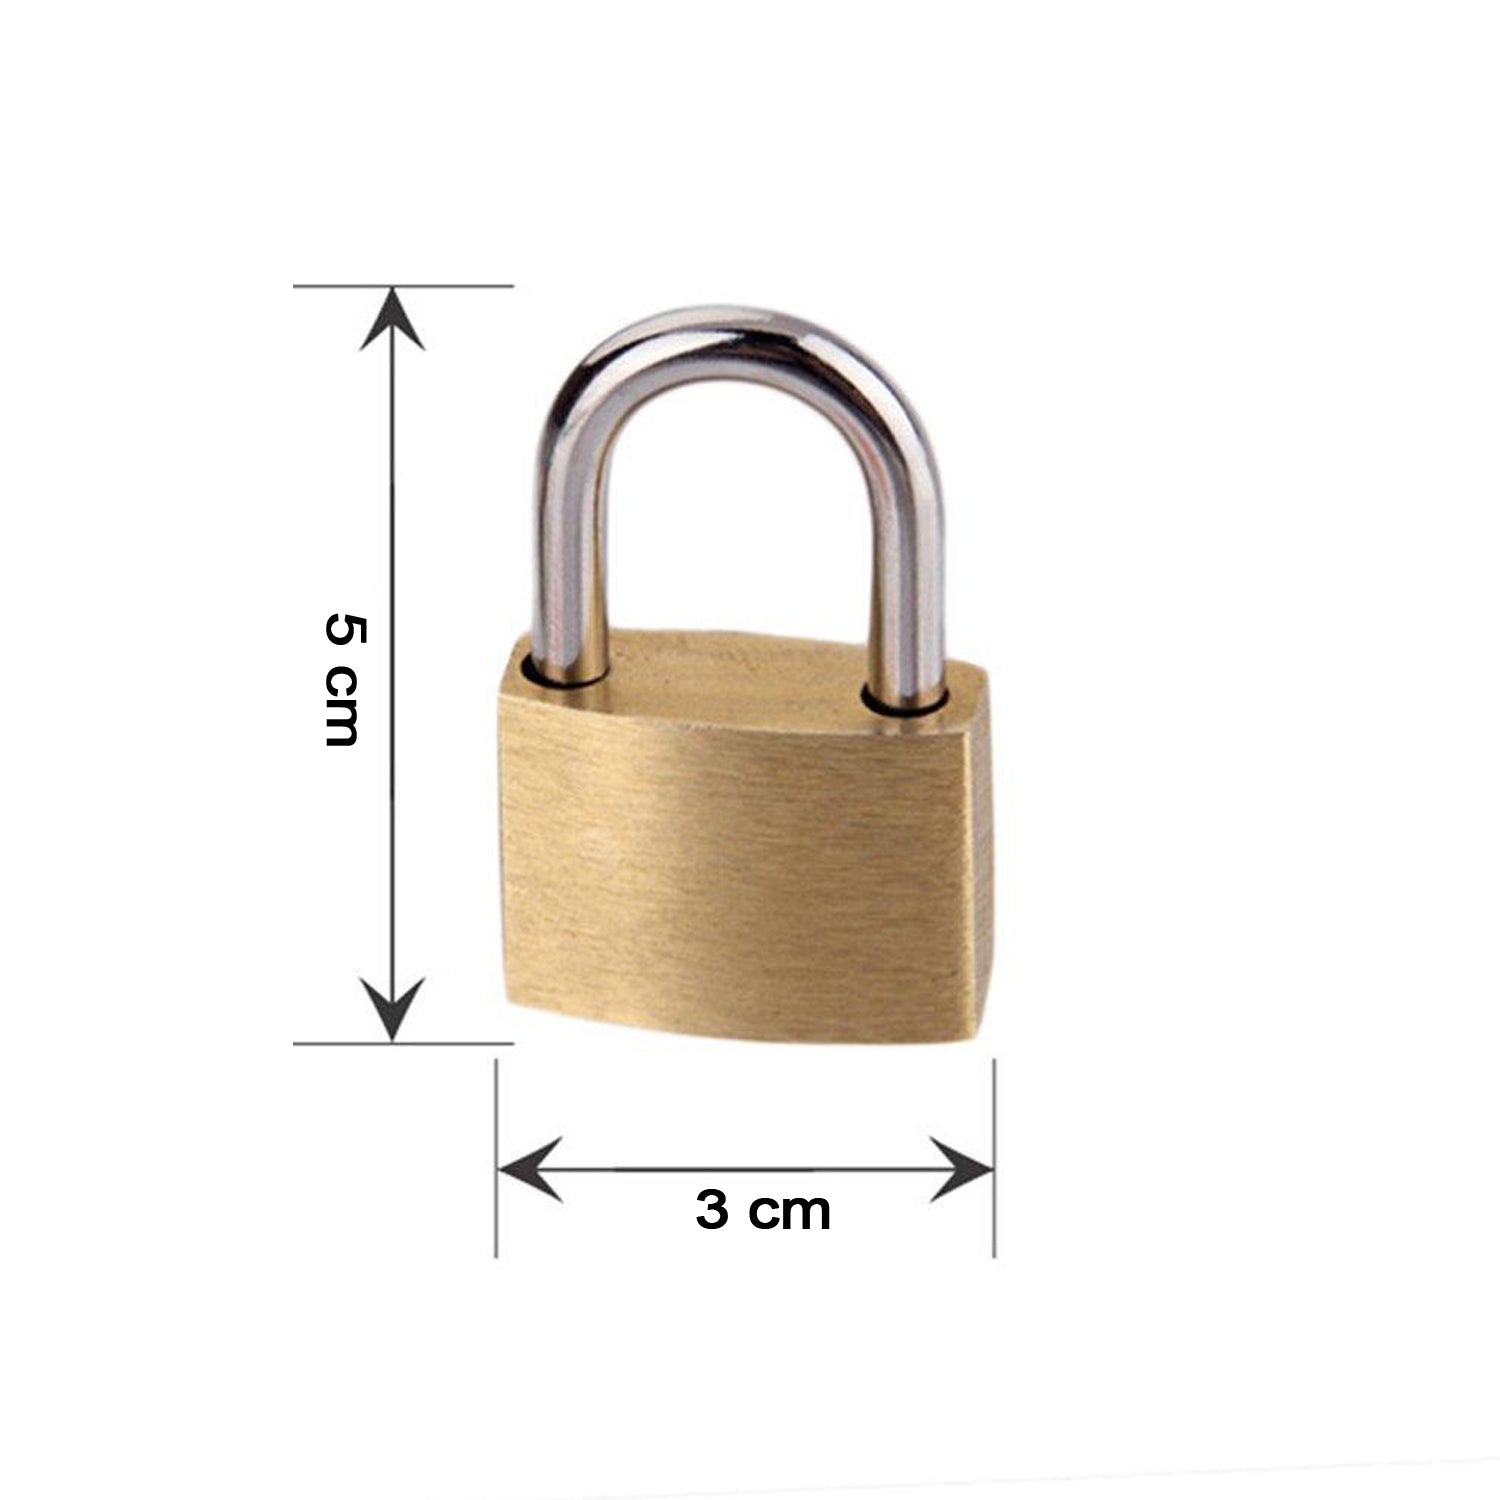 9034 30 Mm Lock N Key Used For Security Purposes In Important Places. 